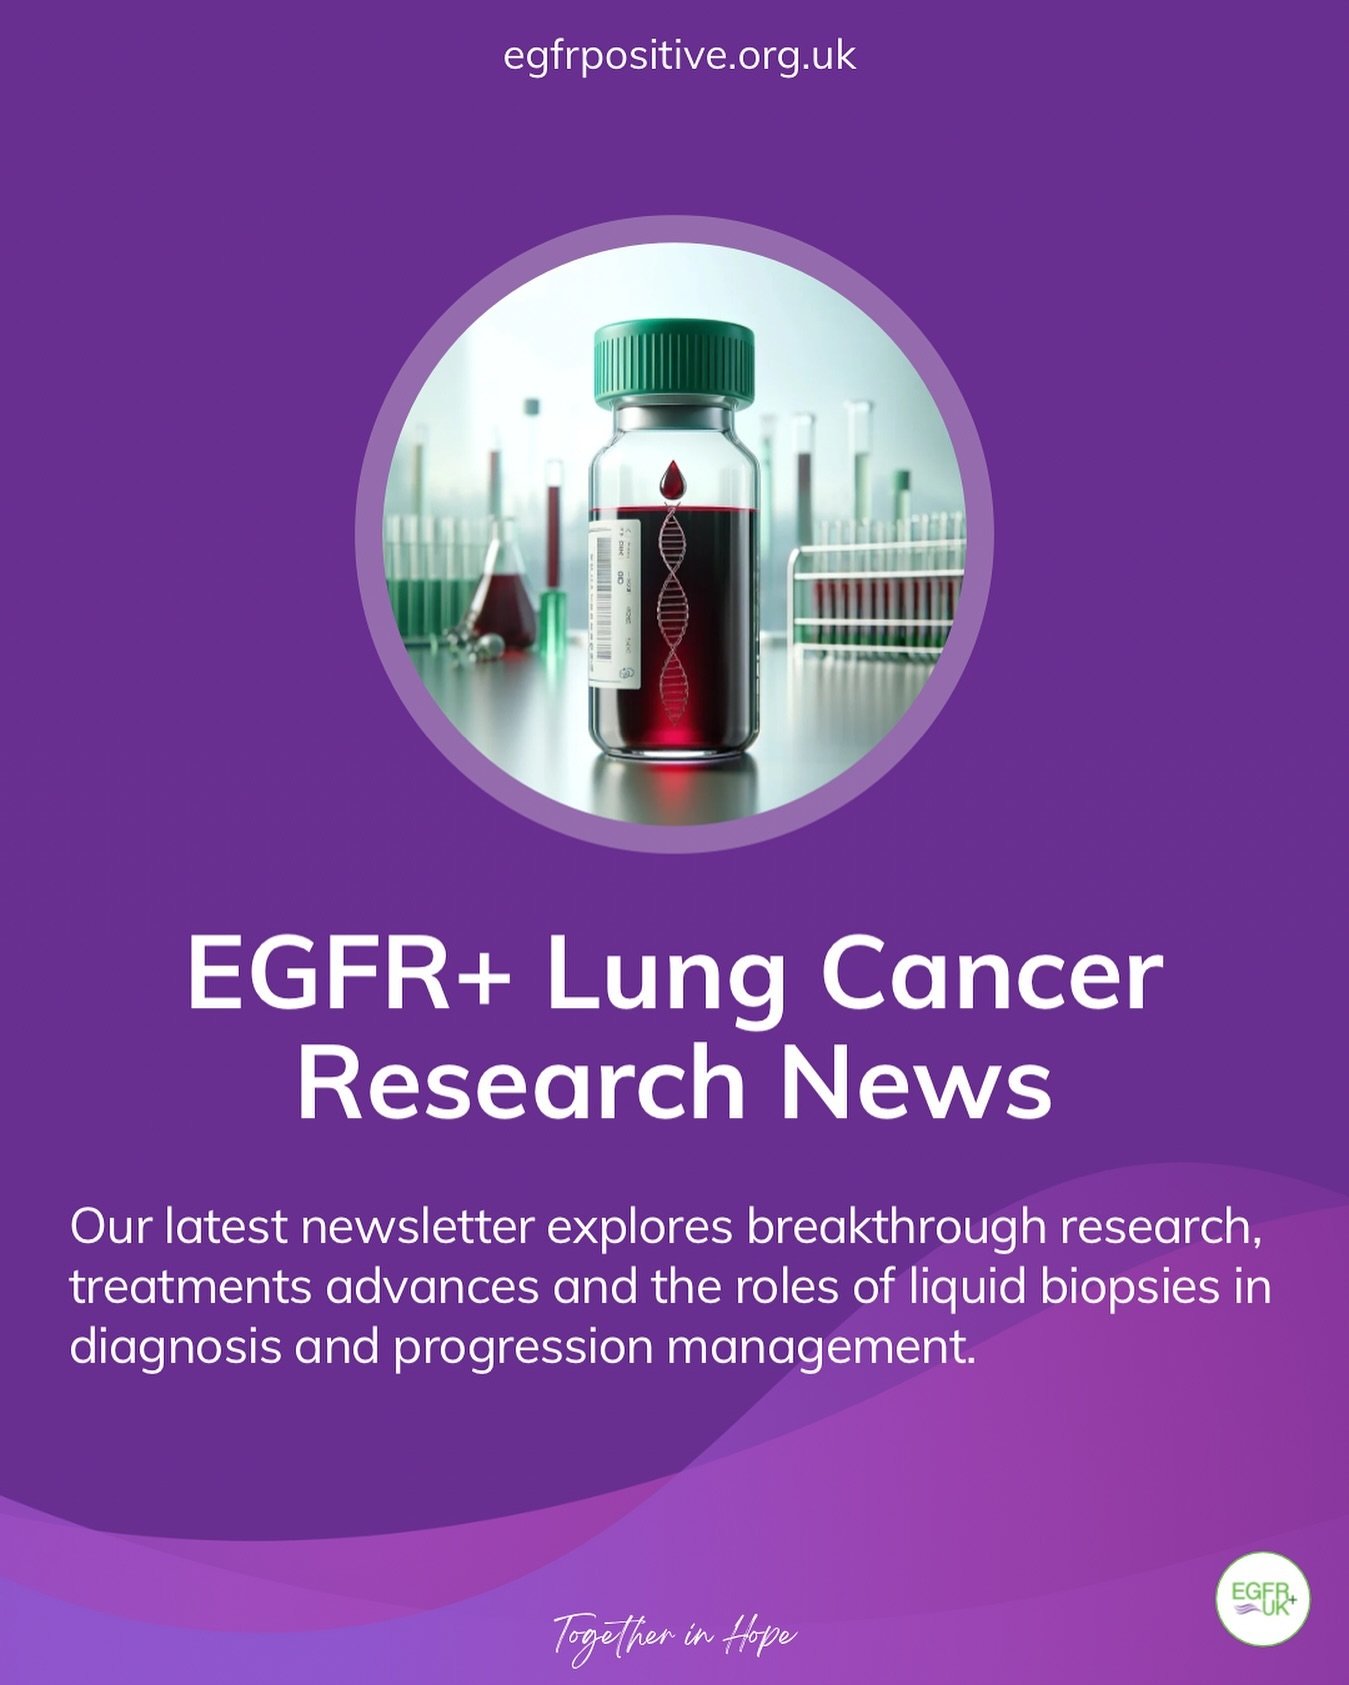 Our latest newsletter is out this weekend, featuring promising advances for EGFR+ lung cancer patients. 

Discover news on breakthrough treatments, combination therapies, and the role of liquid biopsies in diagnosis and progression management.

Find 